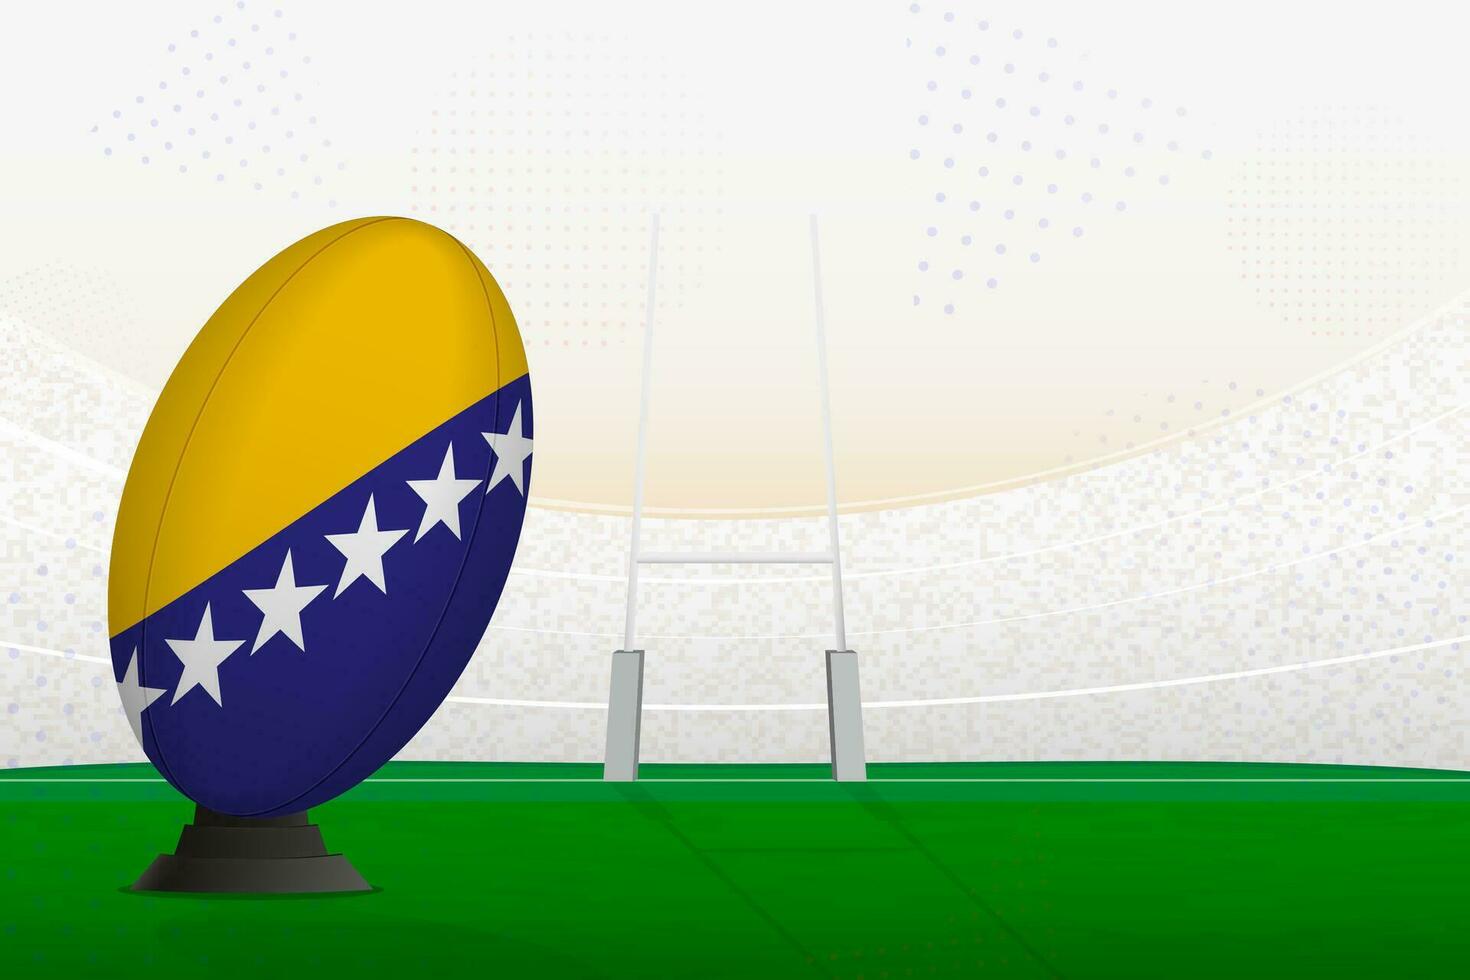 Bosnia and Herzegovina national team rugby ball on rugby stadium and goal posts, preparing for a penalty or free kick. vector